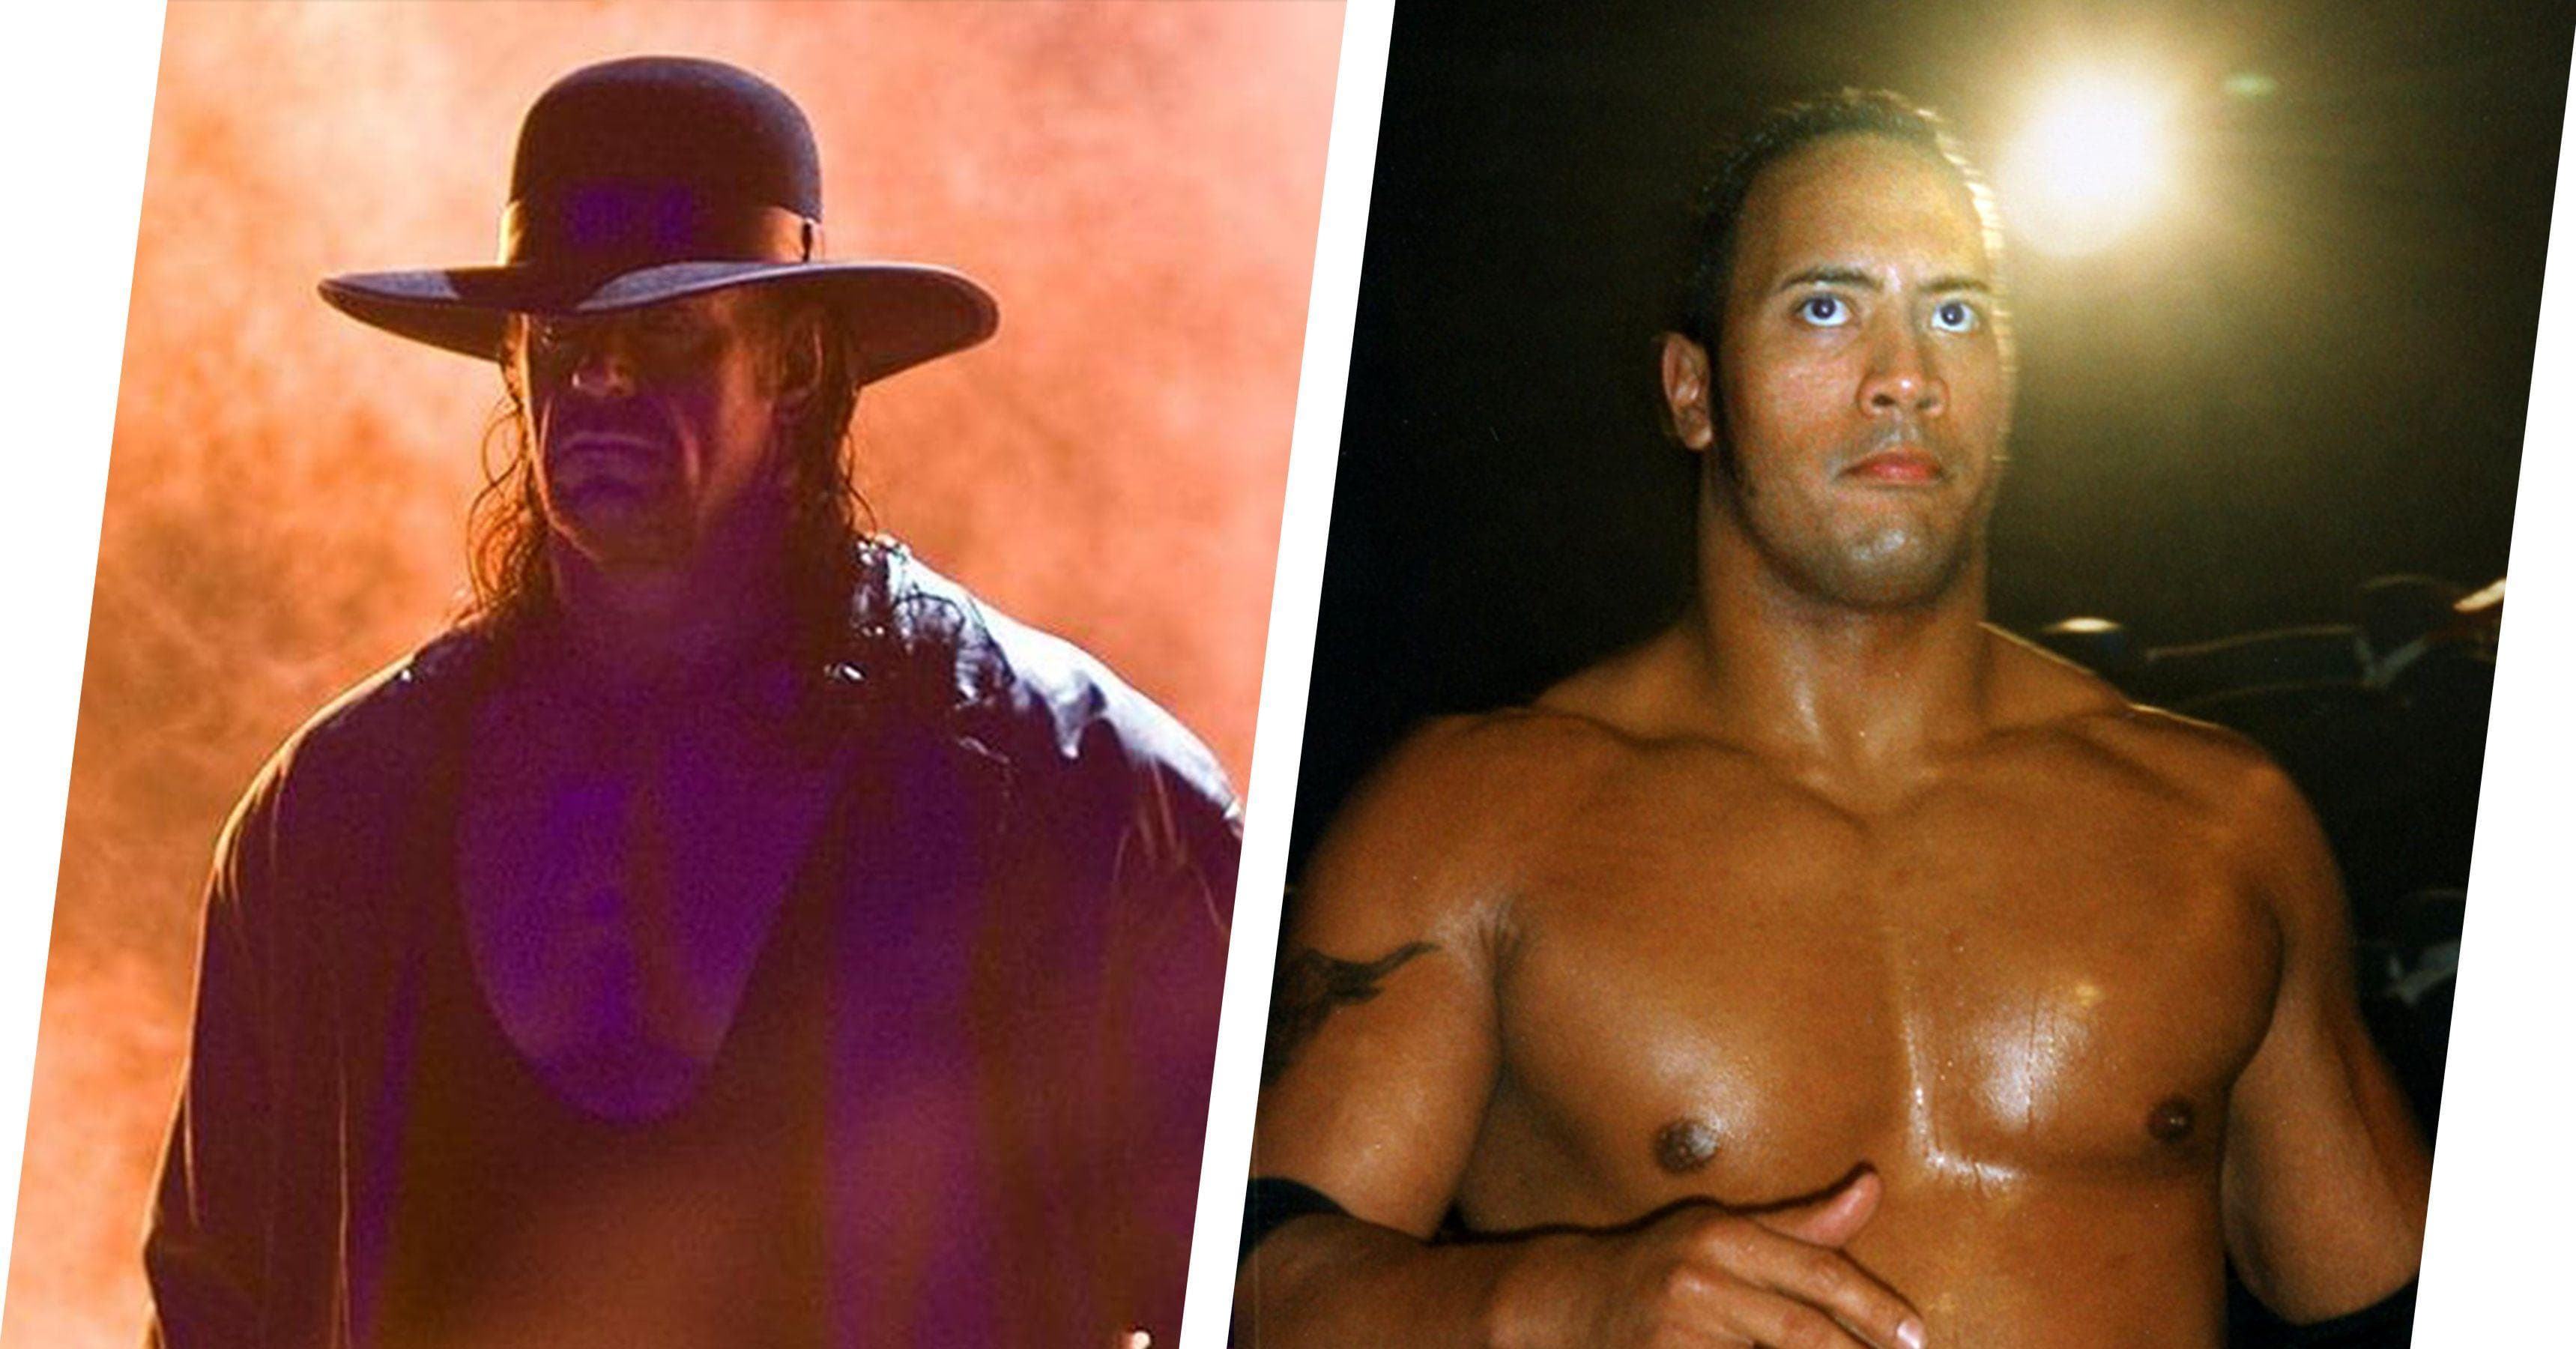 Ranking the 25 Greatest Wrestlers of All Time